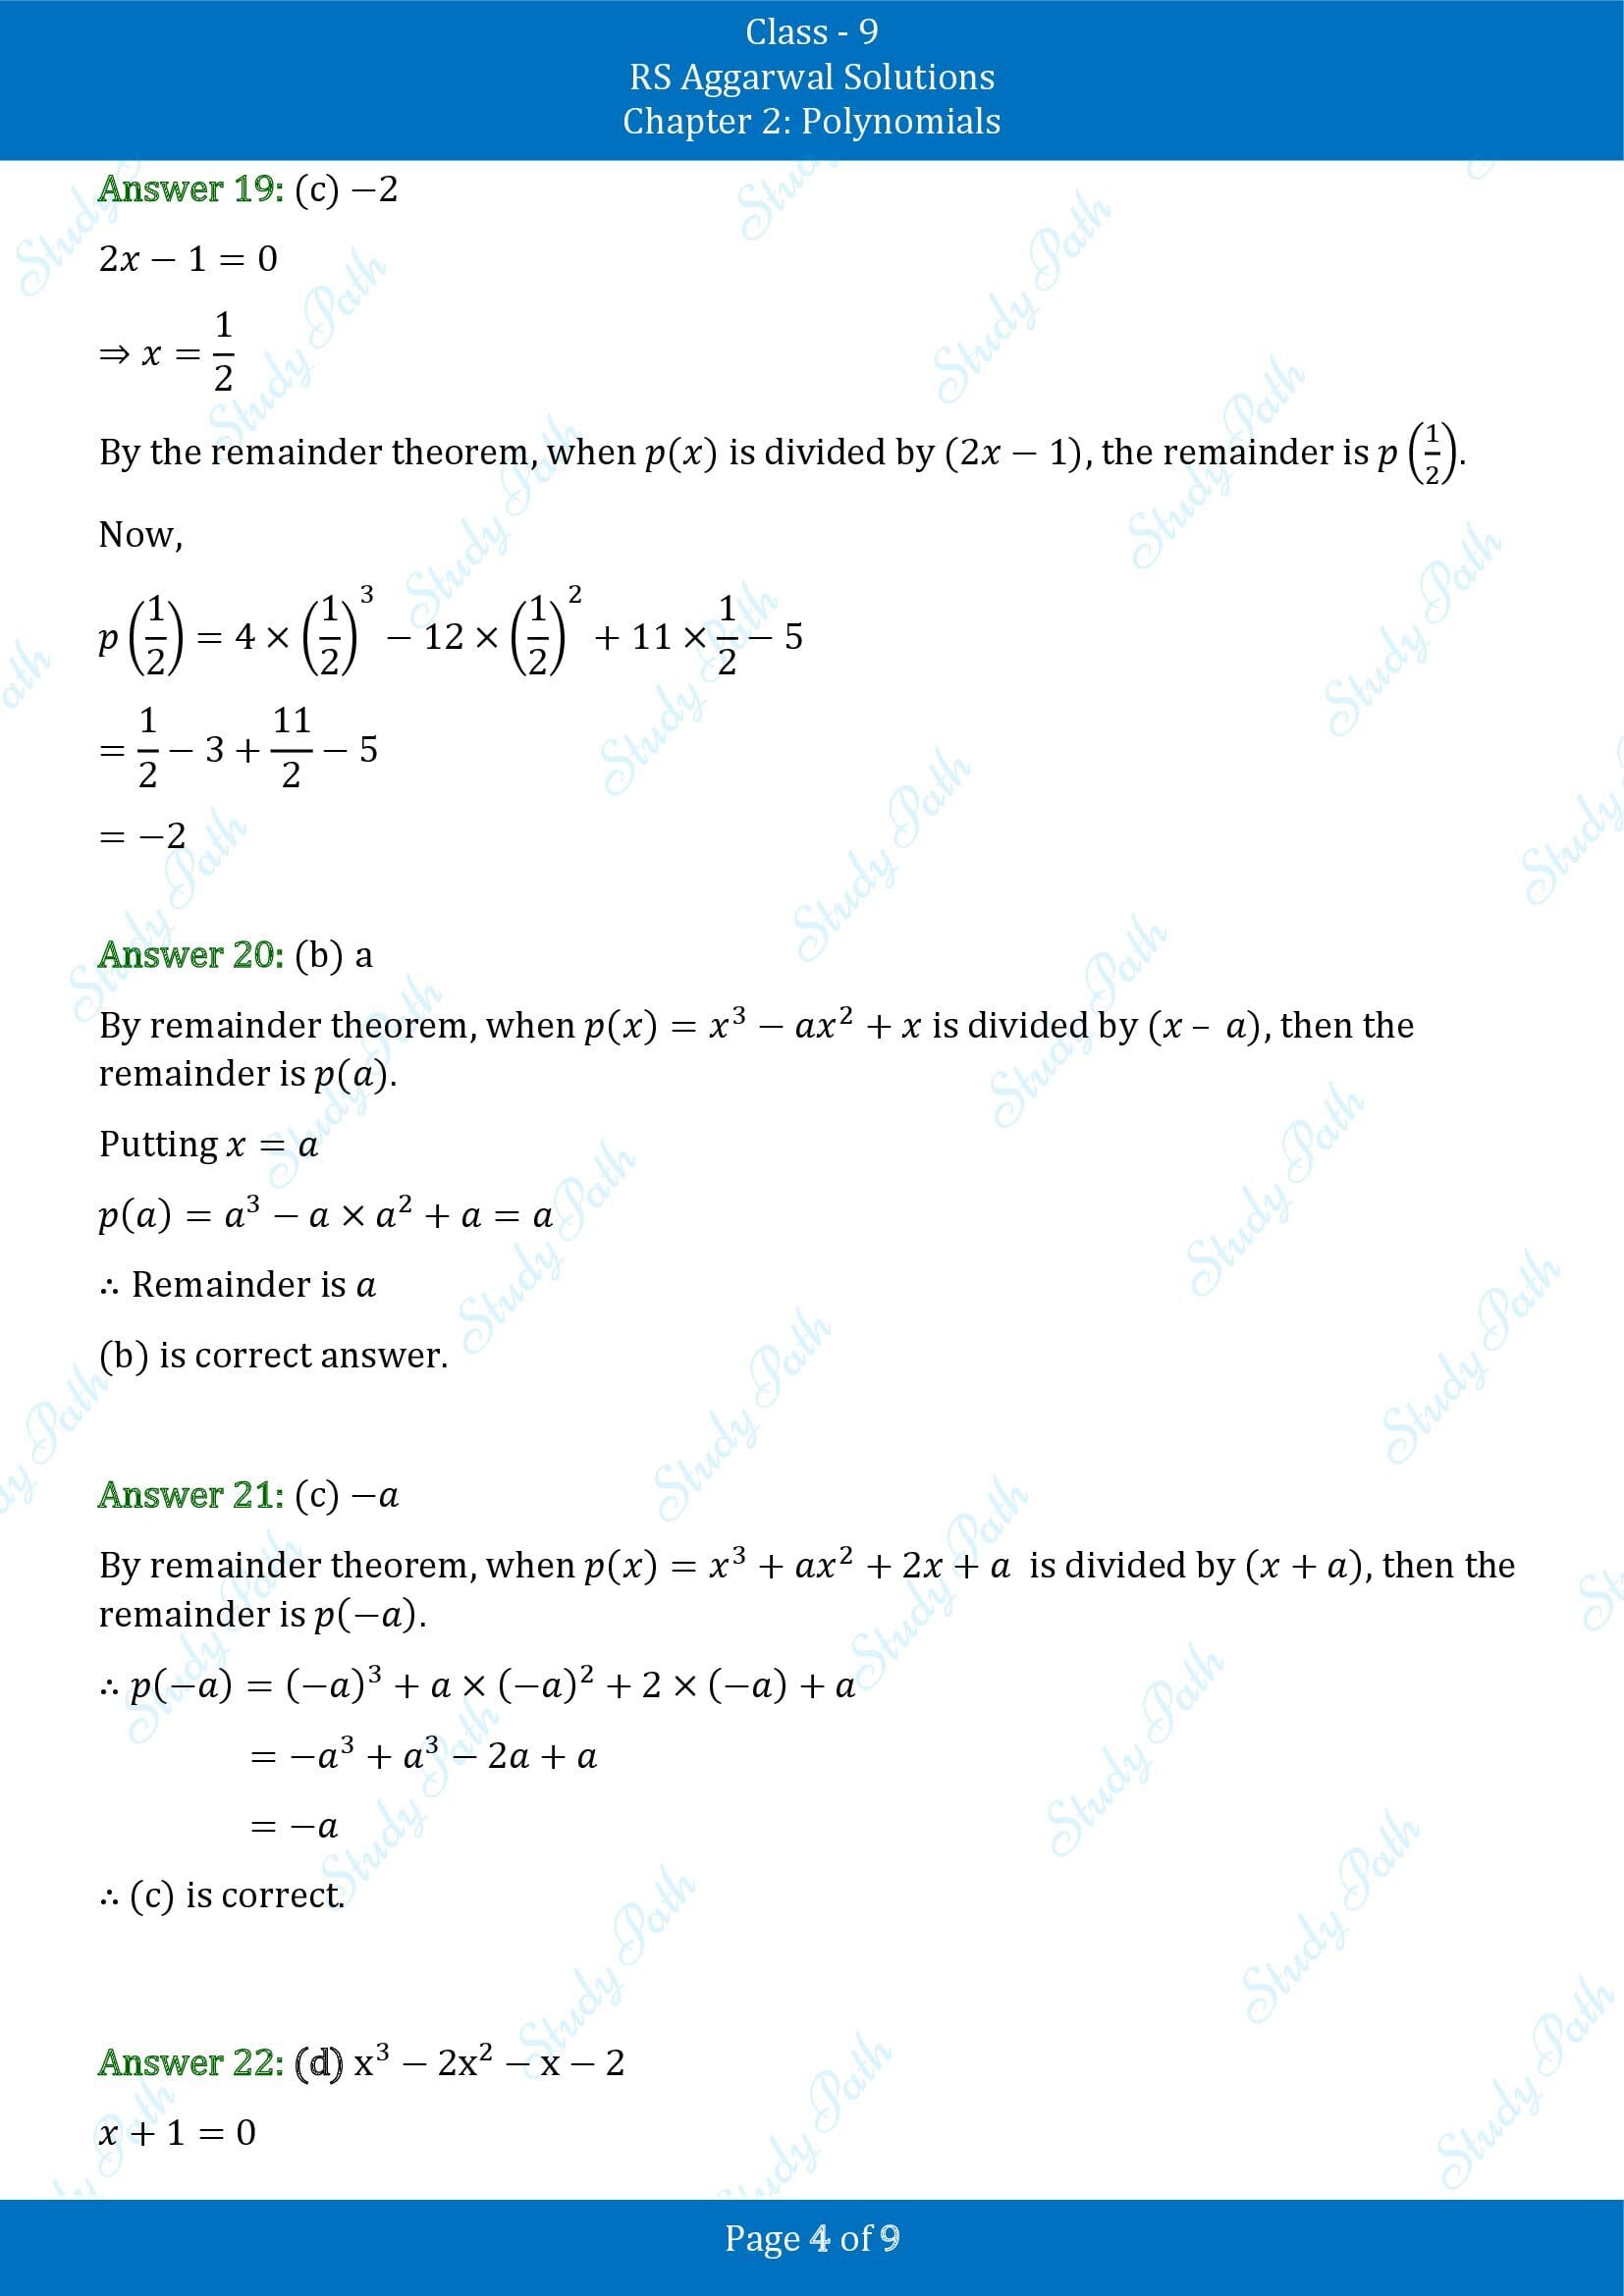 RS Aggarwal Solutions Class 9 Chapter 2 Polynomials Multiple Choice Questions MCQs 00004